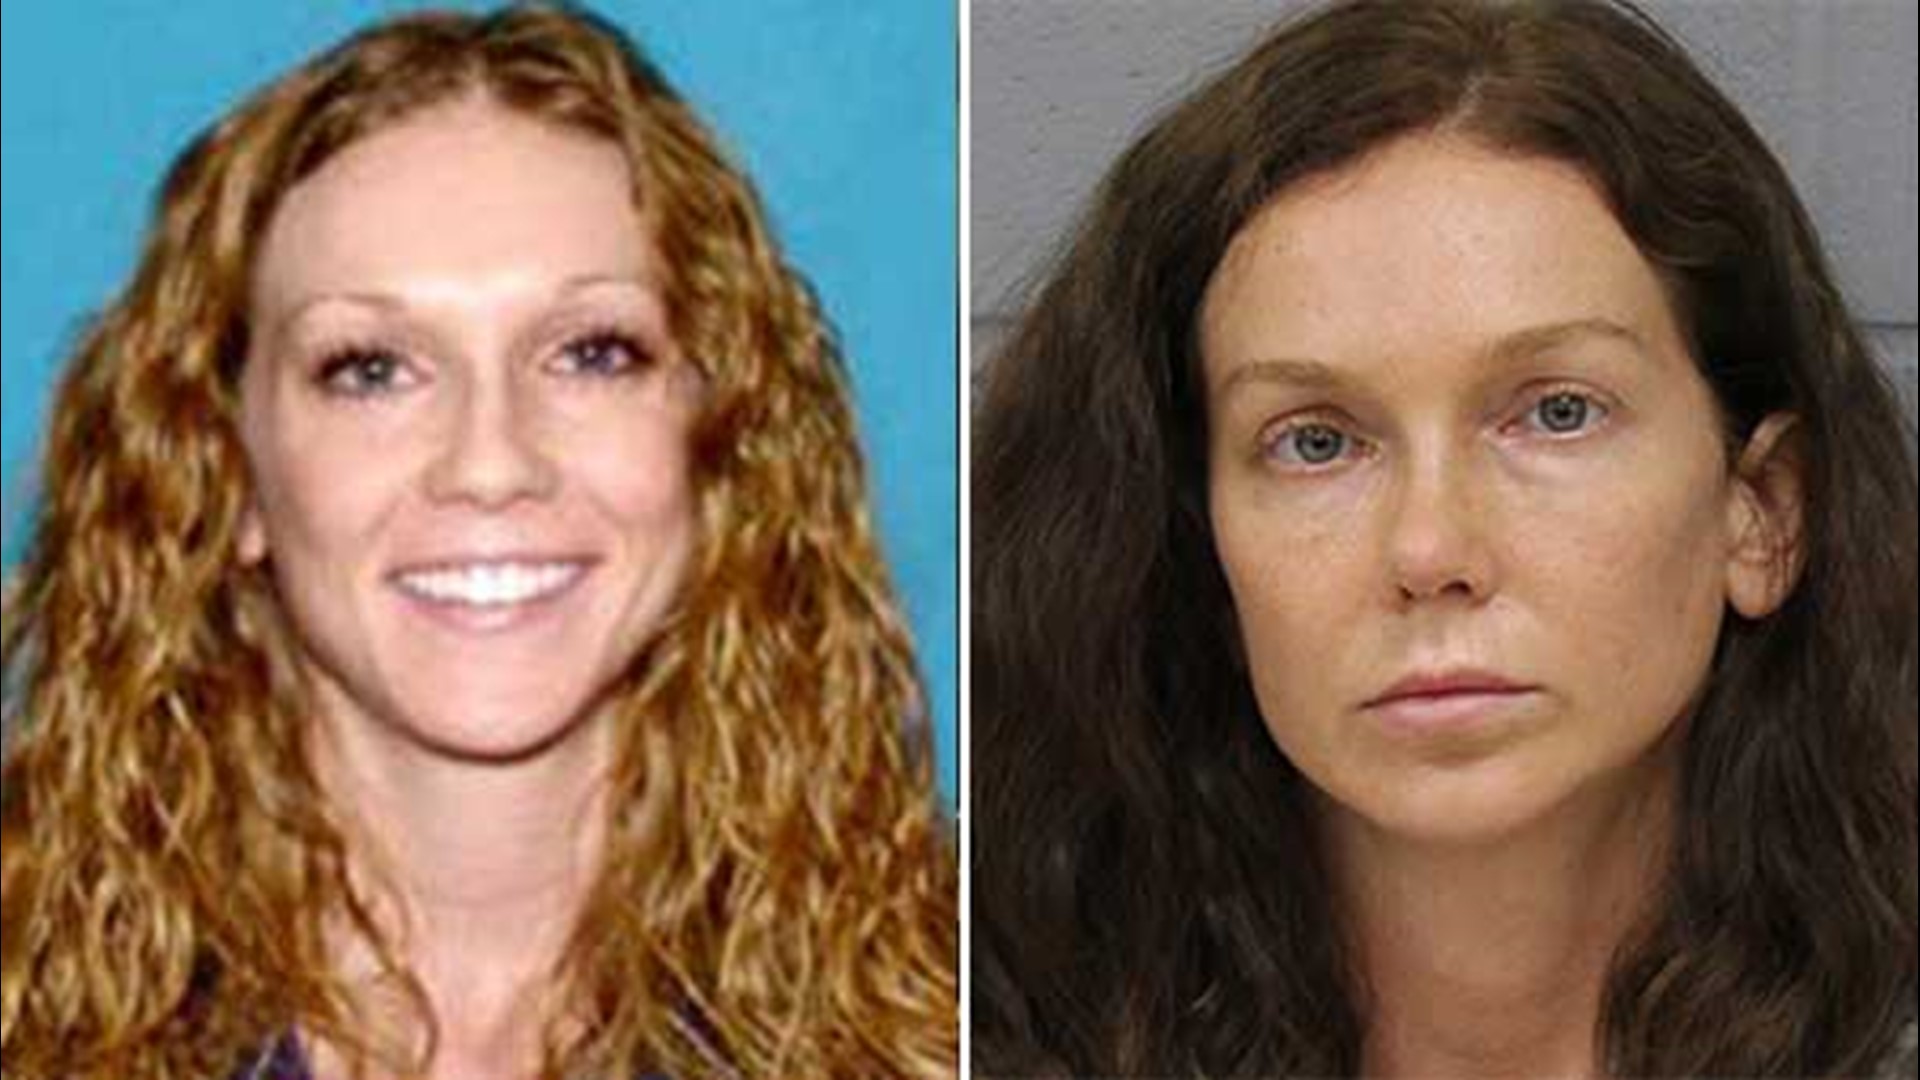 Investigators say Kaitlin Armstrong killed a romantic rival, then fled the country.